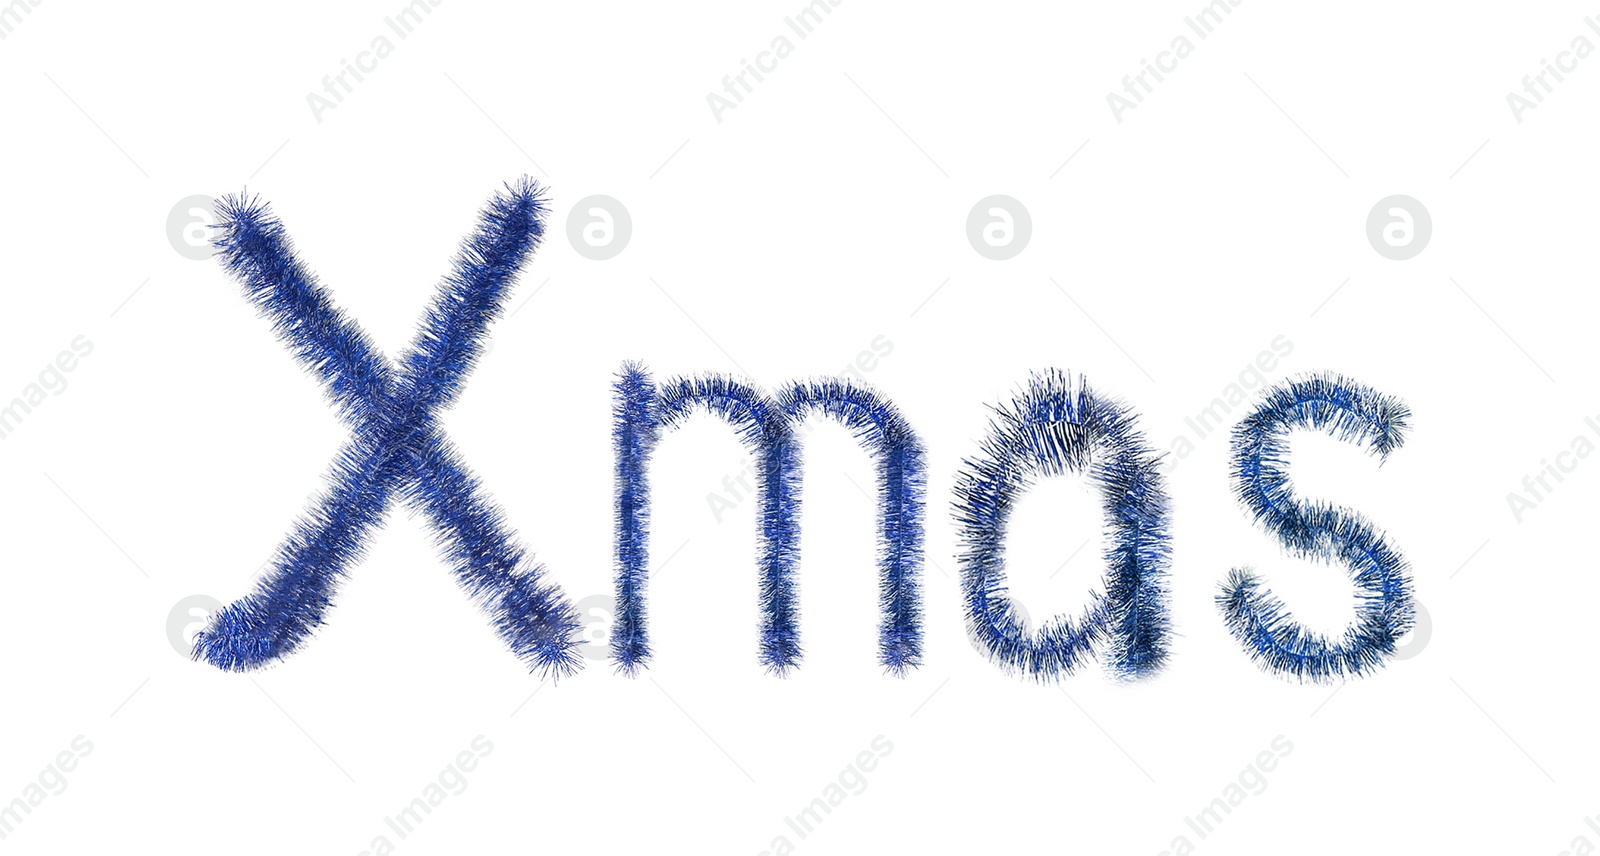 Image of Word Xmas made of shiny blue tinsels on white background